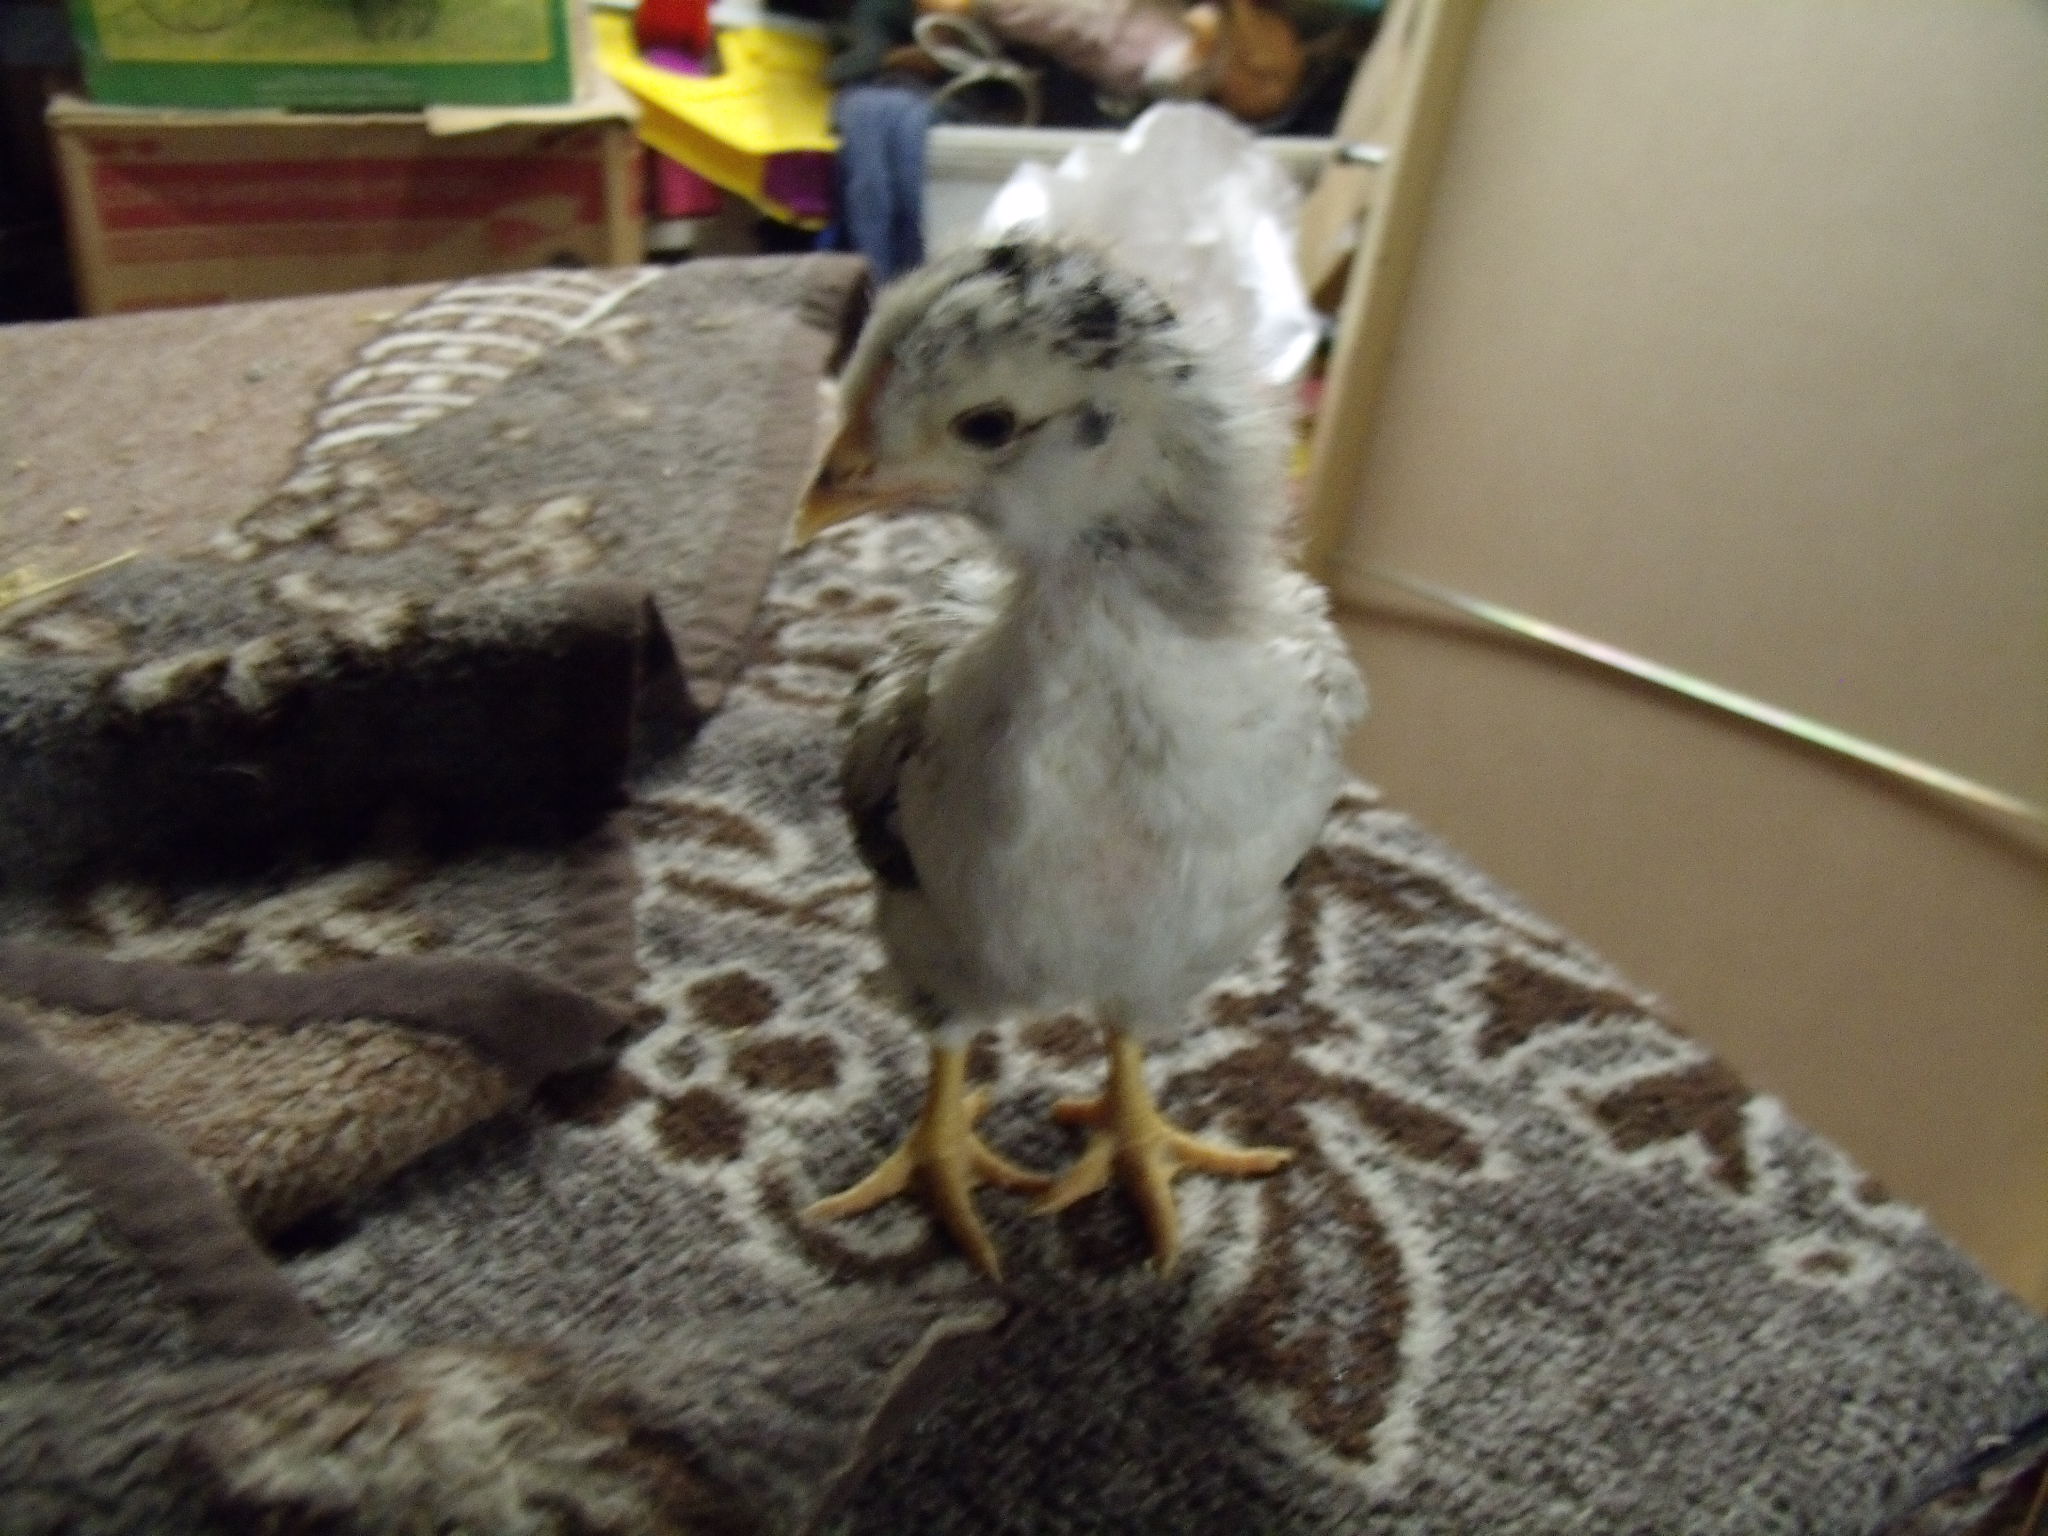 Rocky Road, hatched January 1st 2012